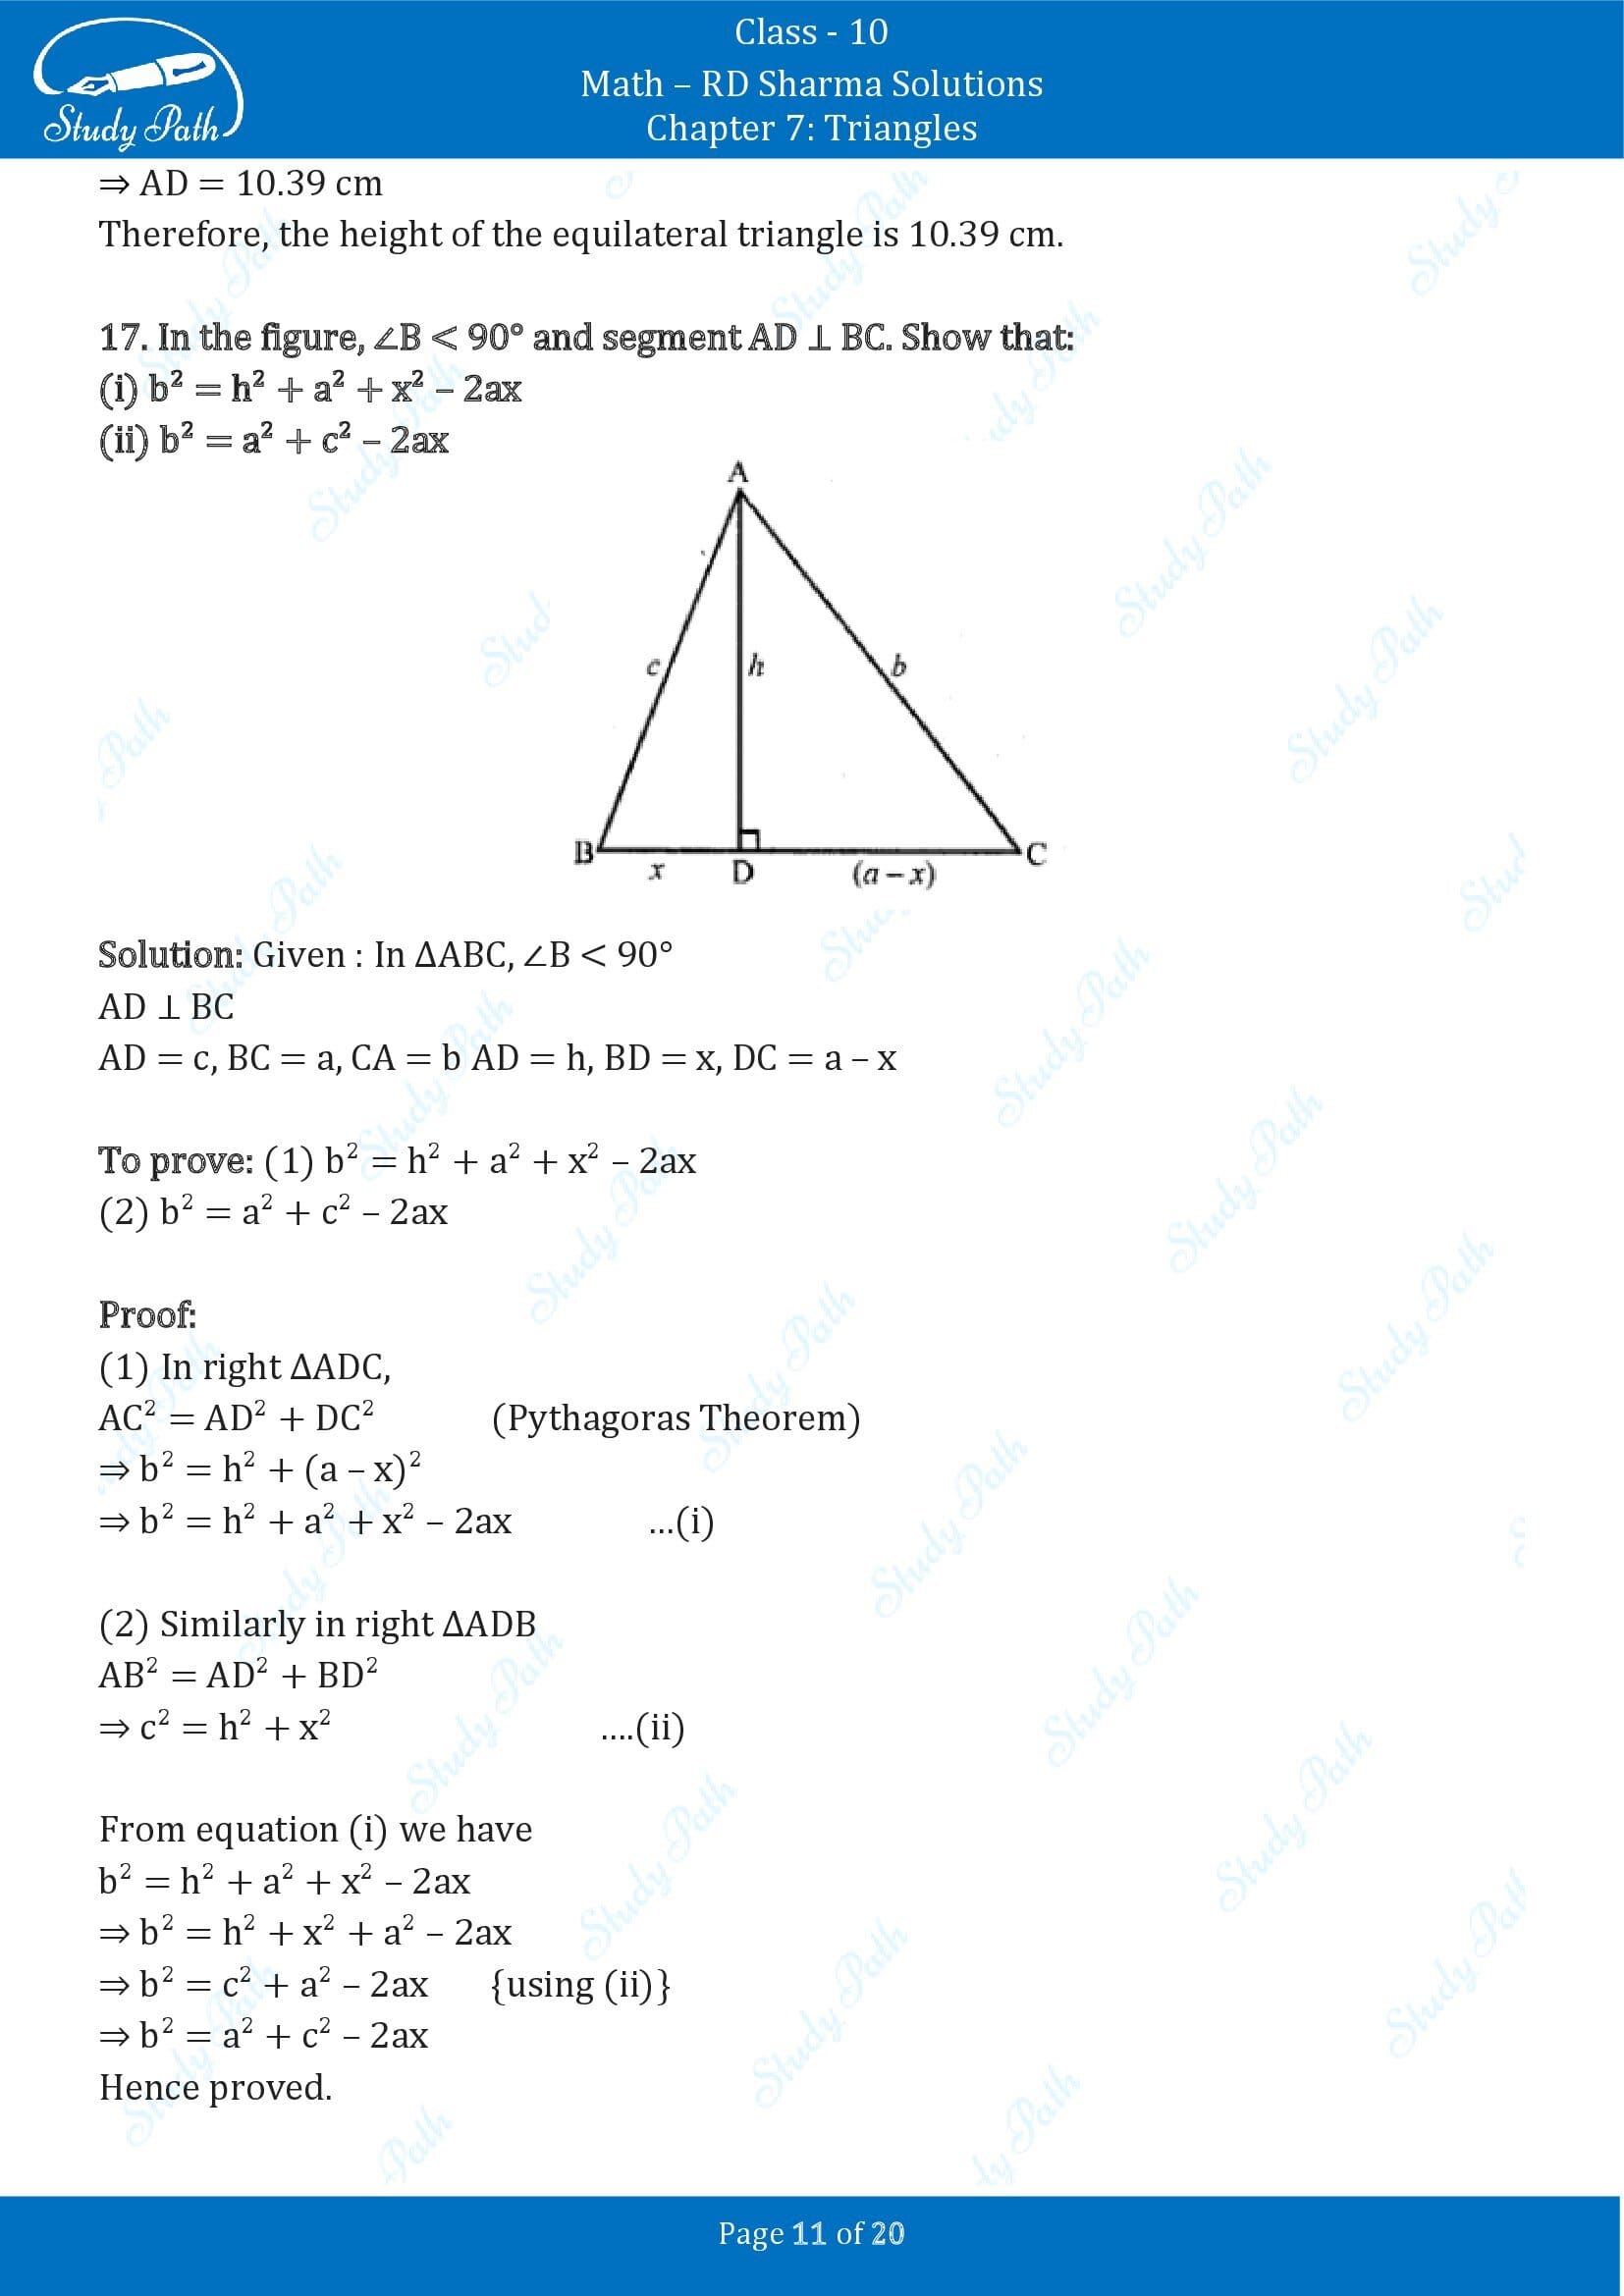 RD Sharma Solutions Class 10 Chapter 7 Triangles Exercise 7.7 00011